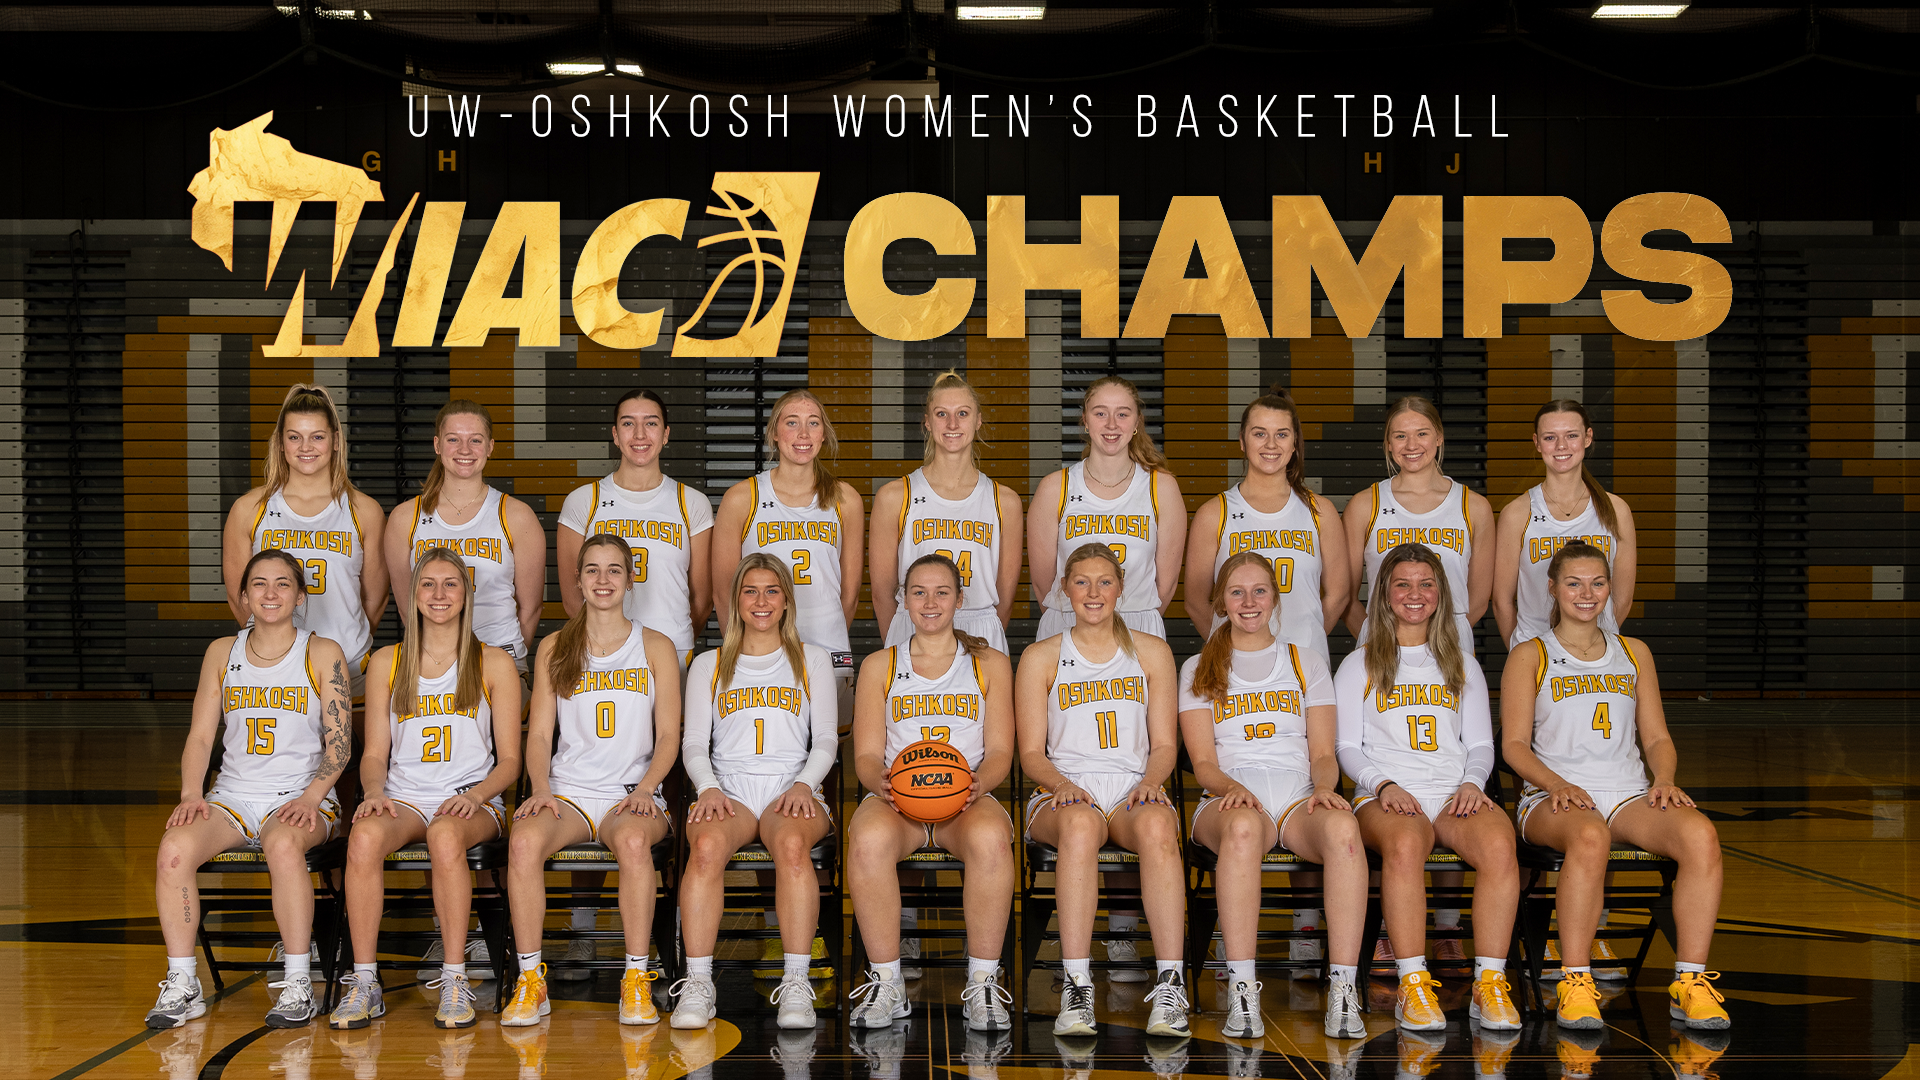 The Titans claimed at least a share of their 15th WIAC regular season title with a 64-55 win over the Eagles on Wednesday.